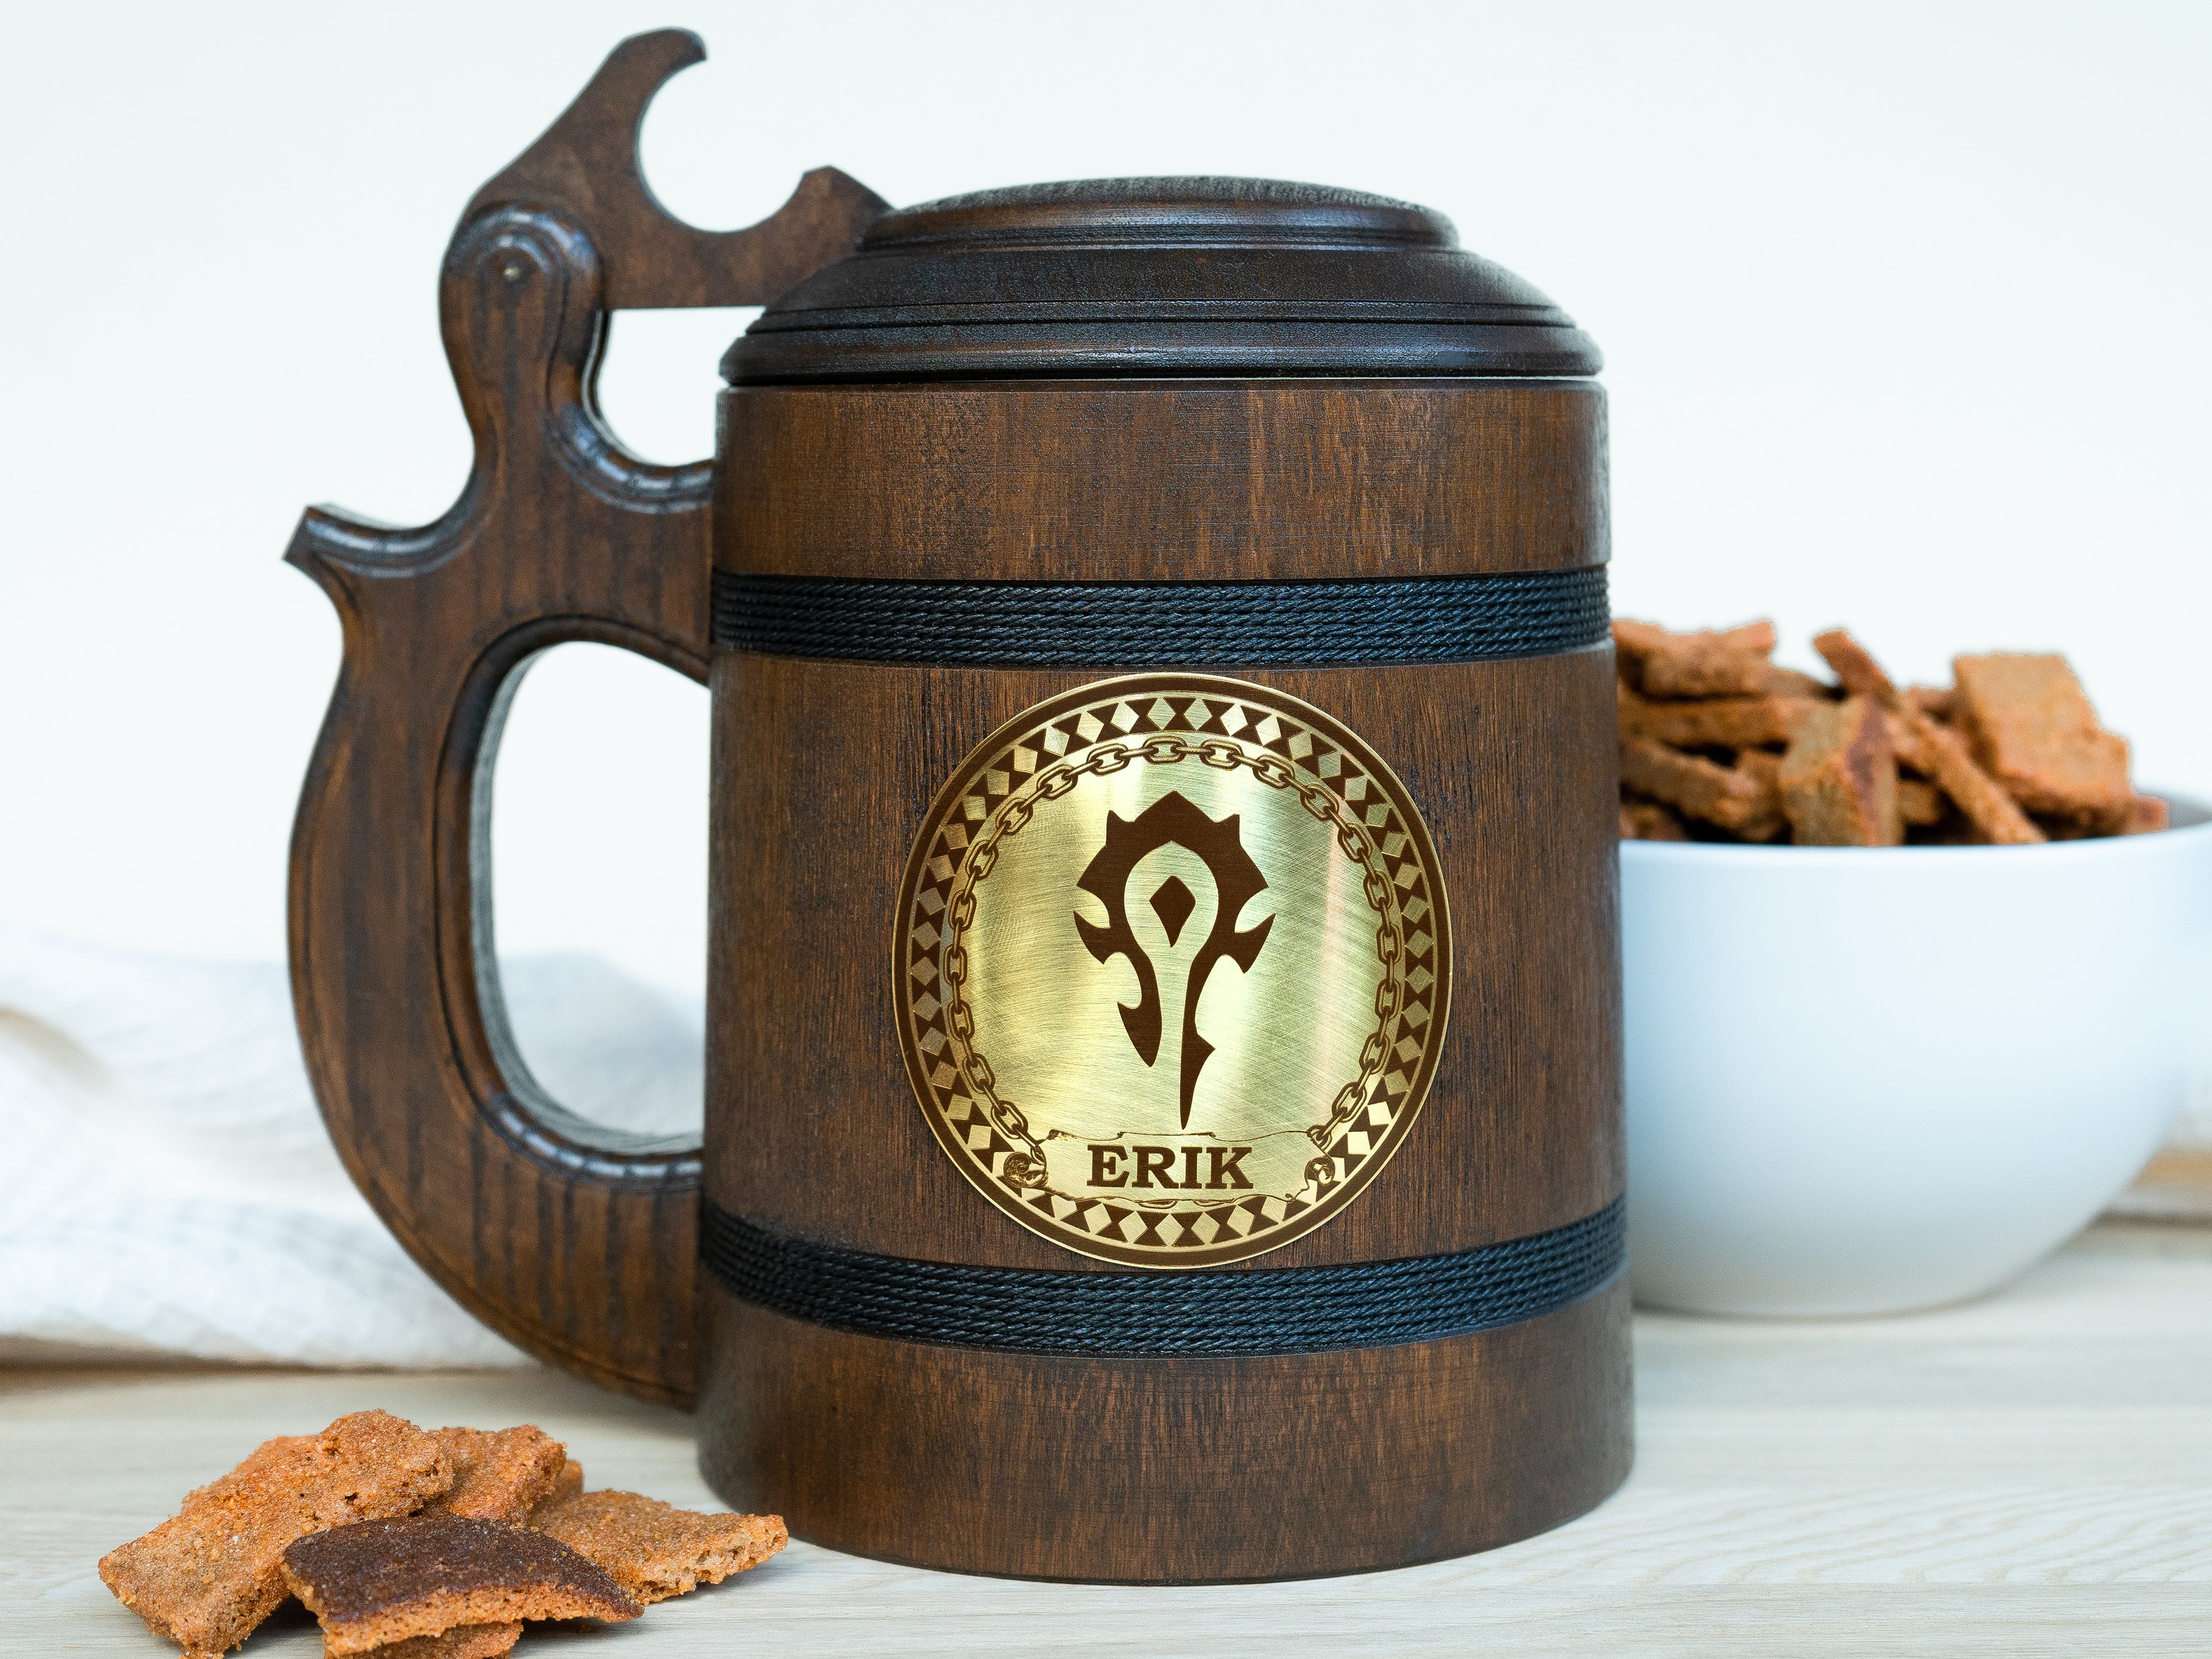 World of warcraft wooden mug with lid, WoW mugs - GravisCup